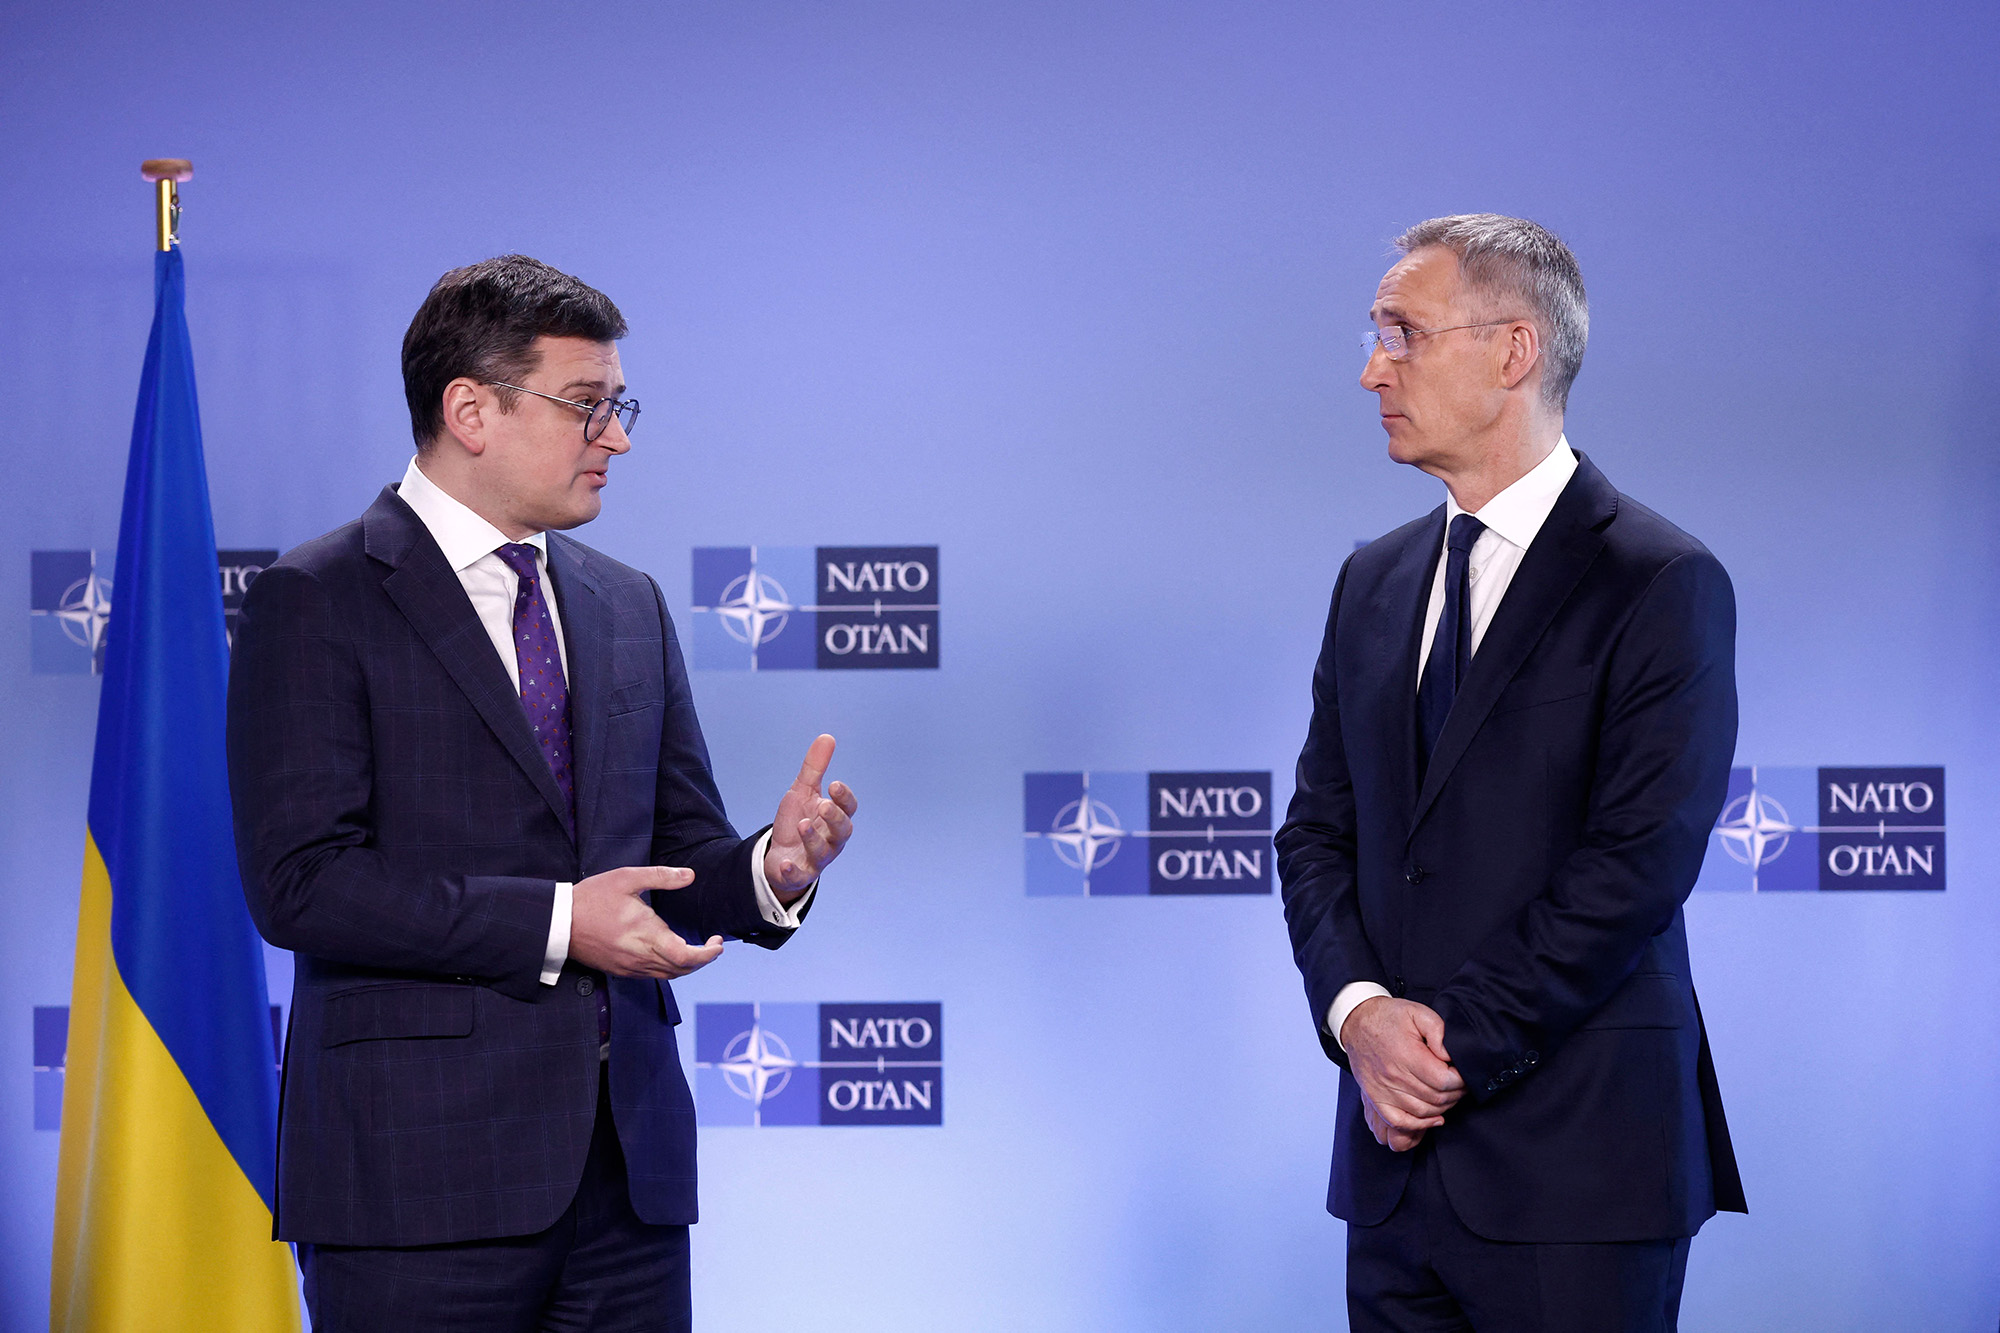 NATO Secretary General Jens Stoltenberg, right, and Ukrainian Foreign Affairs Minister Dmytro Kuleba give joint statements on the sidelines of a NATO meeting, at the NATO headquarters in Brussels, Belgium, on April 4.